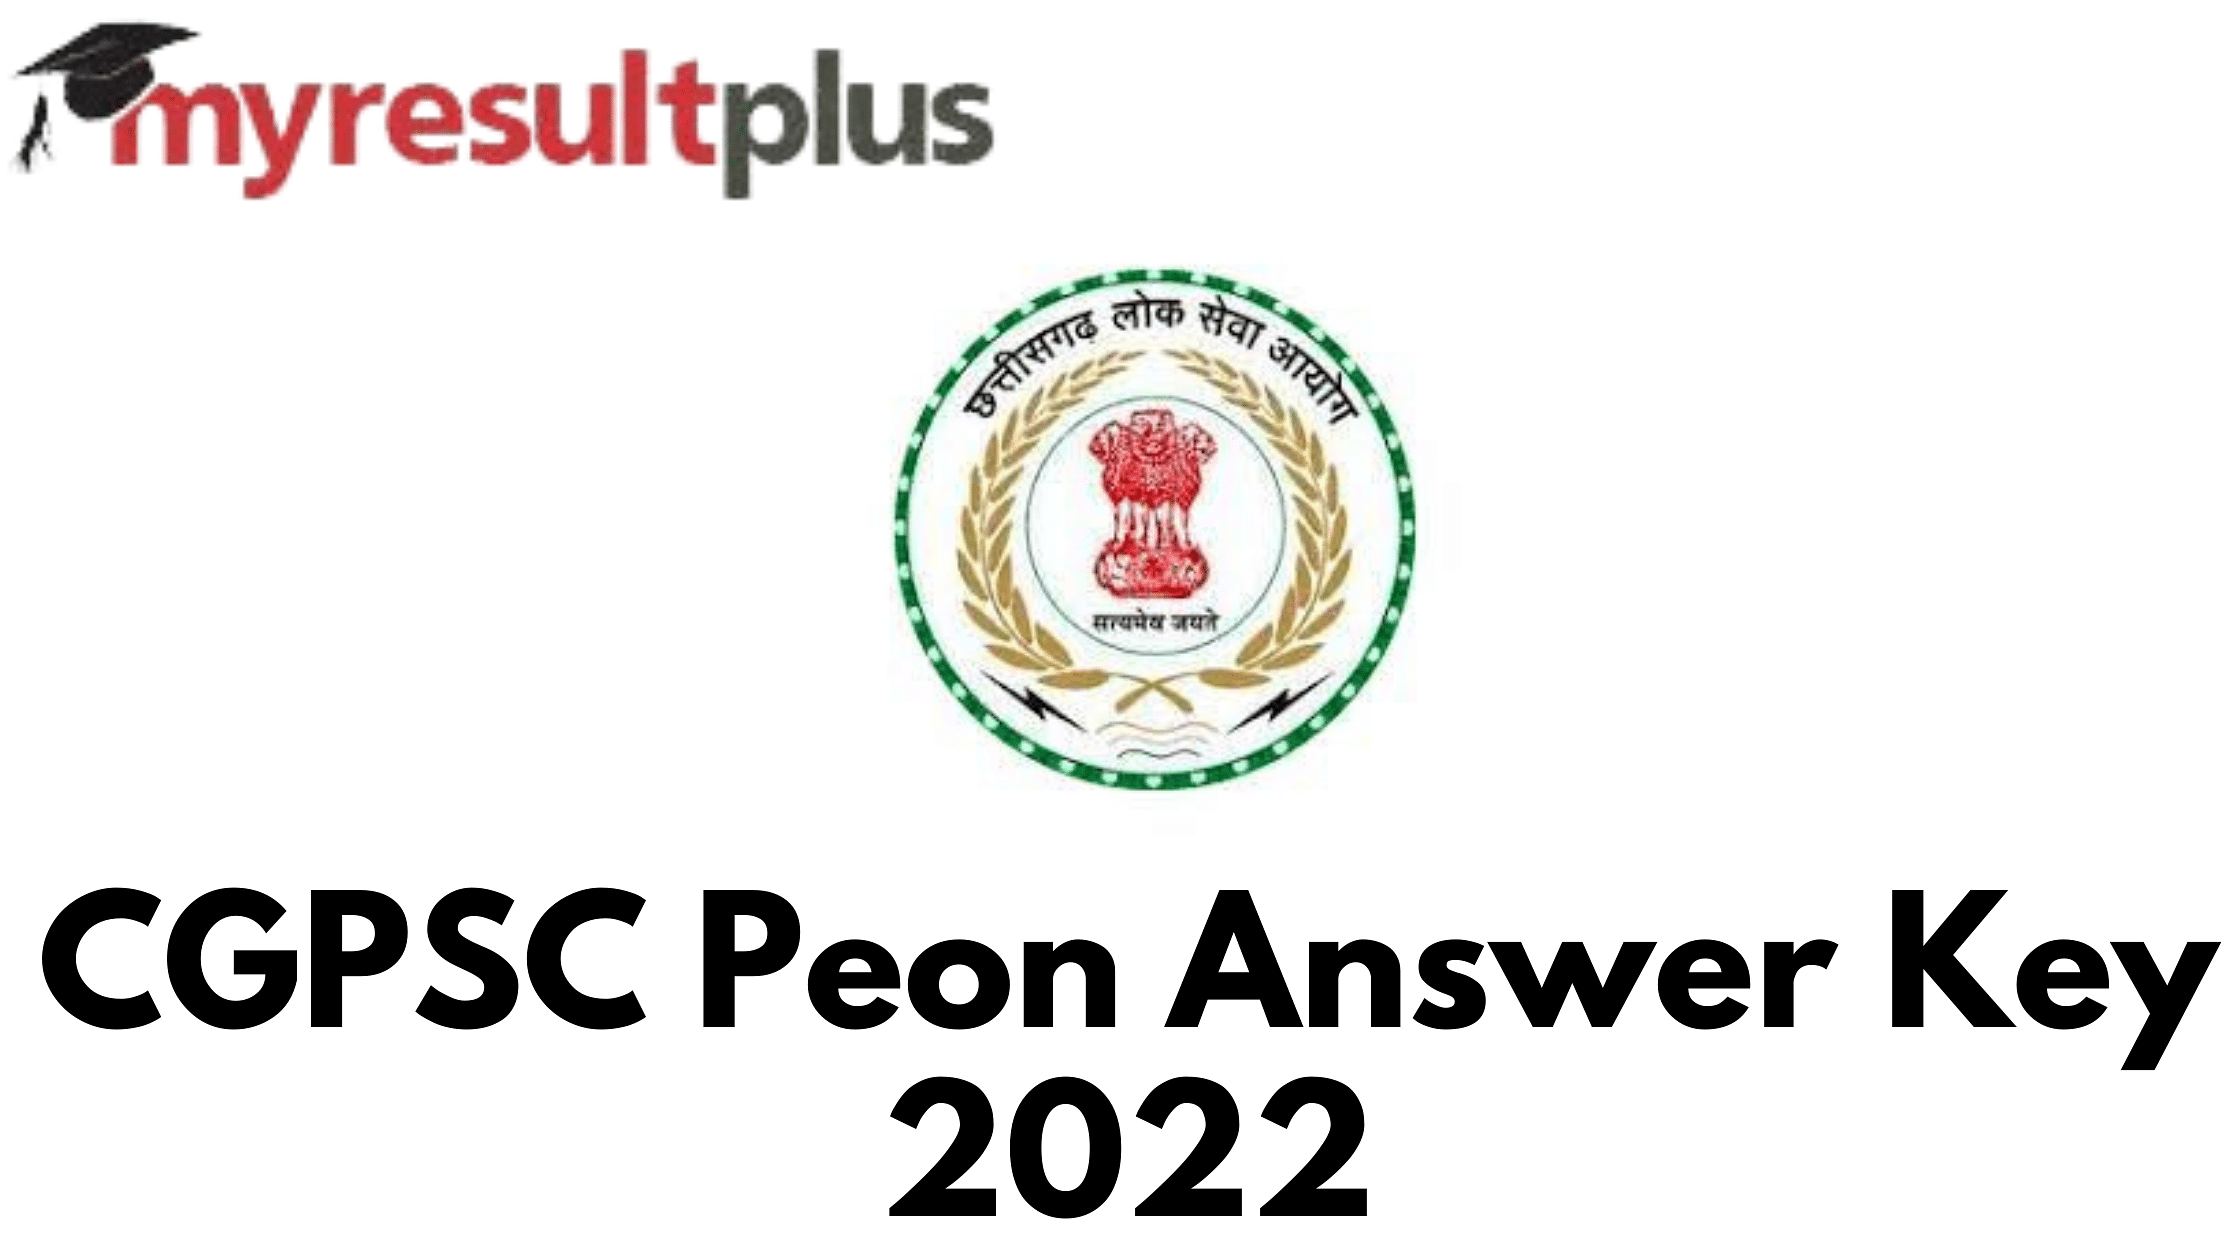 CGPSC Peon Answer Key 2022 Out, Know How to Download Here